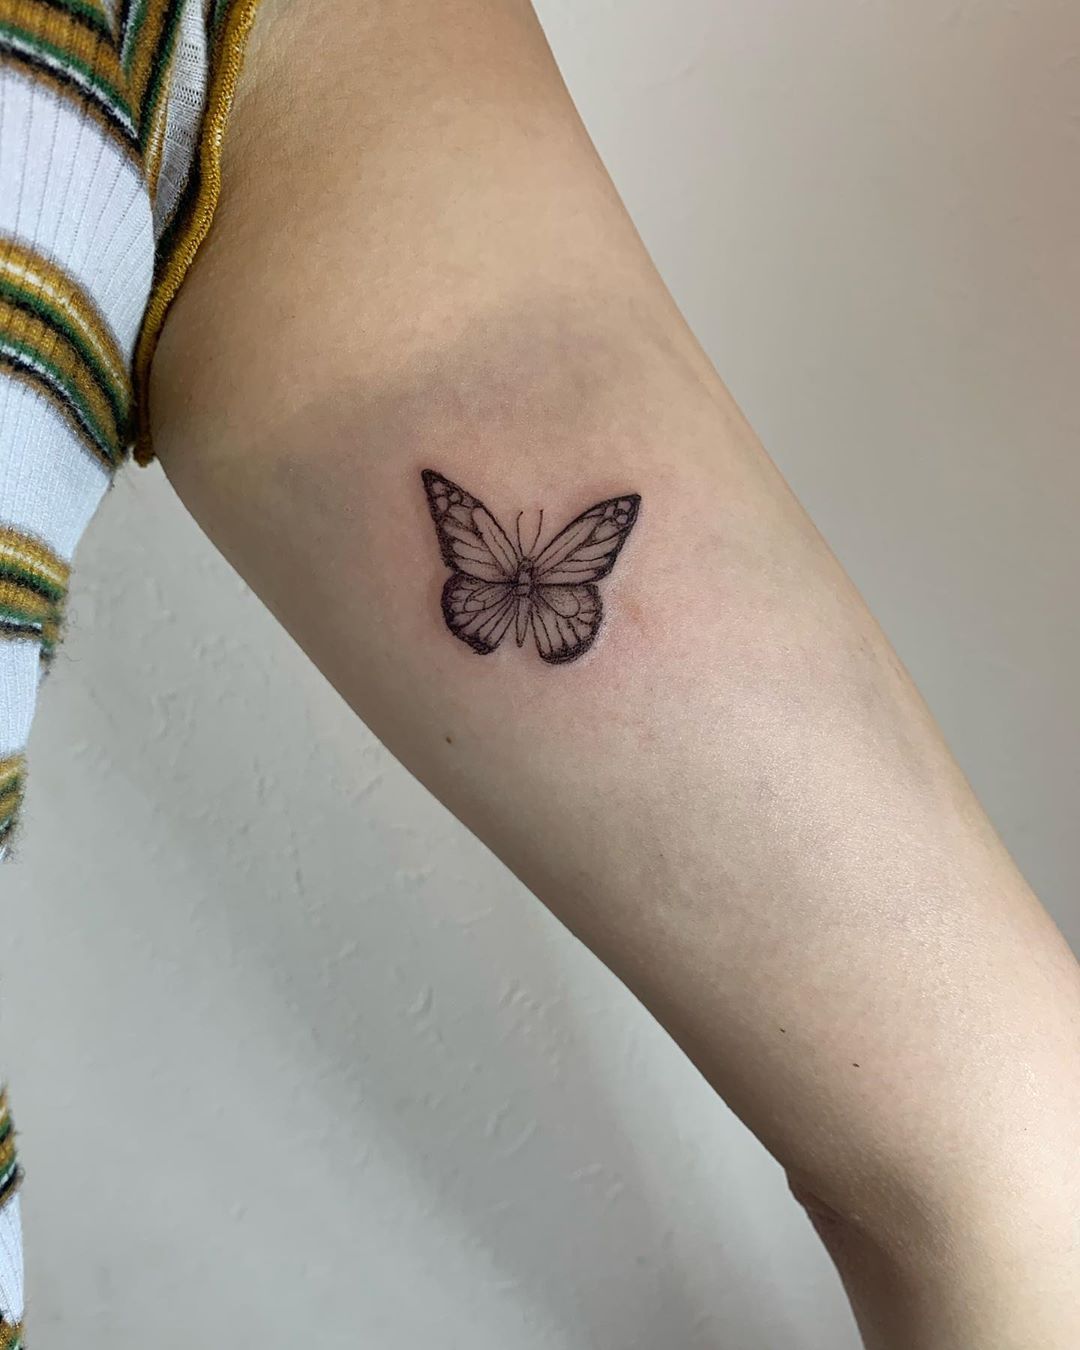 Tokyo Tattoo Studio Small Butterfly Just No Strong Black Lines